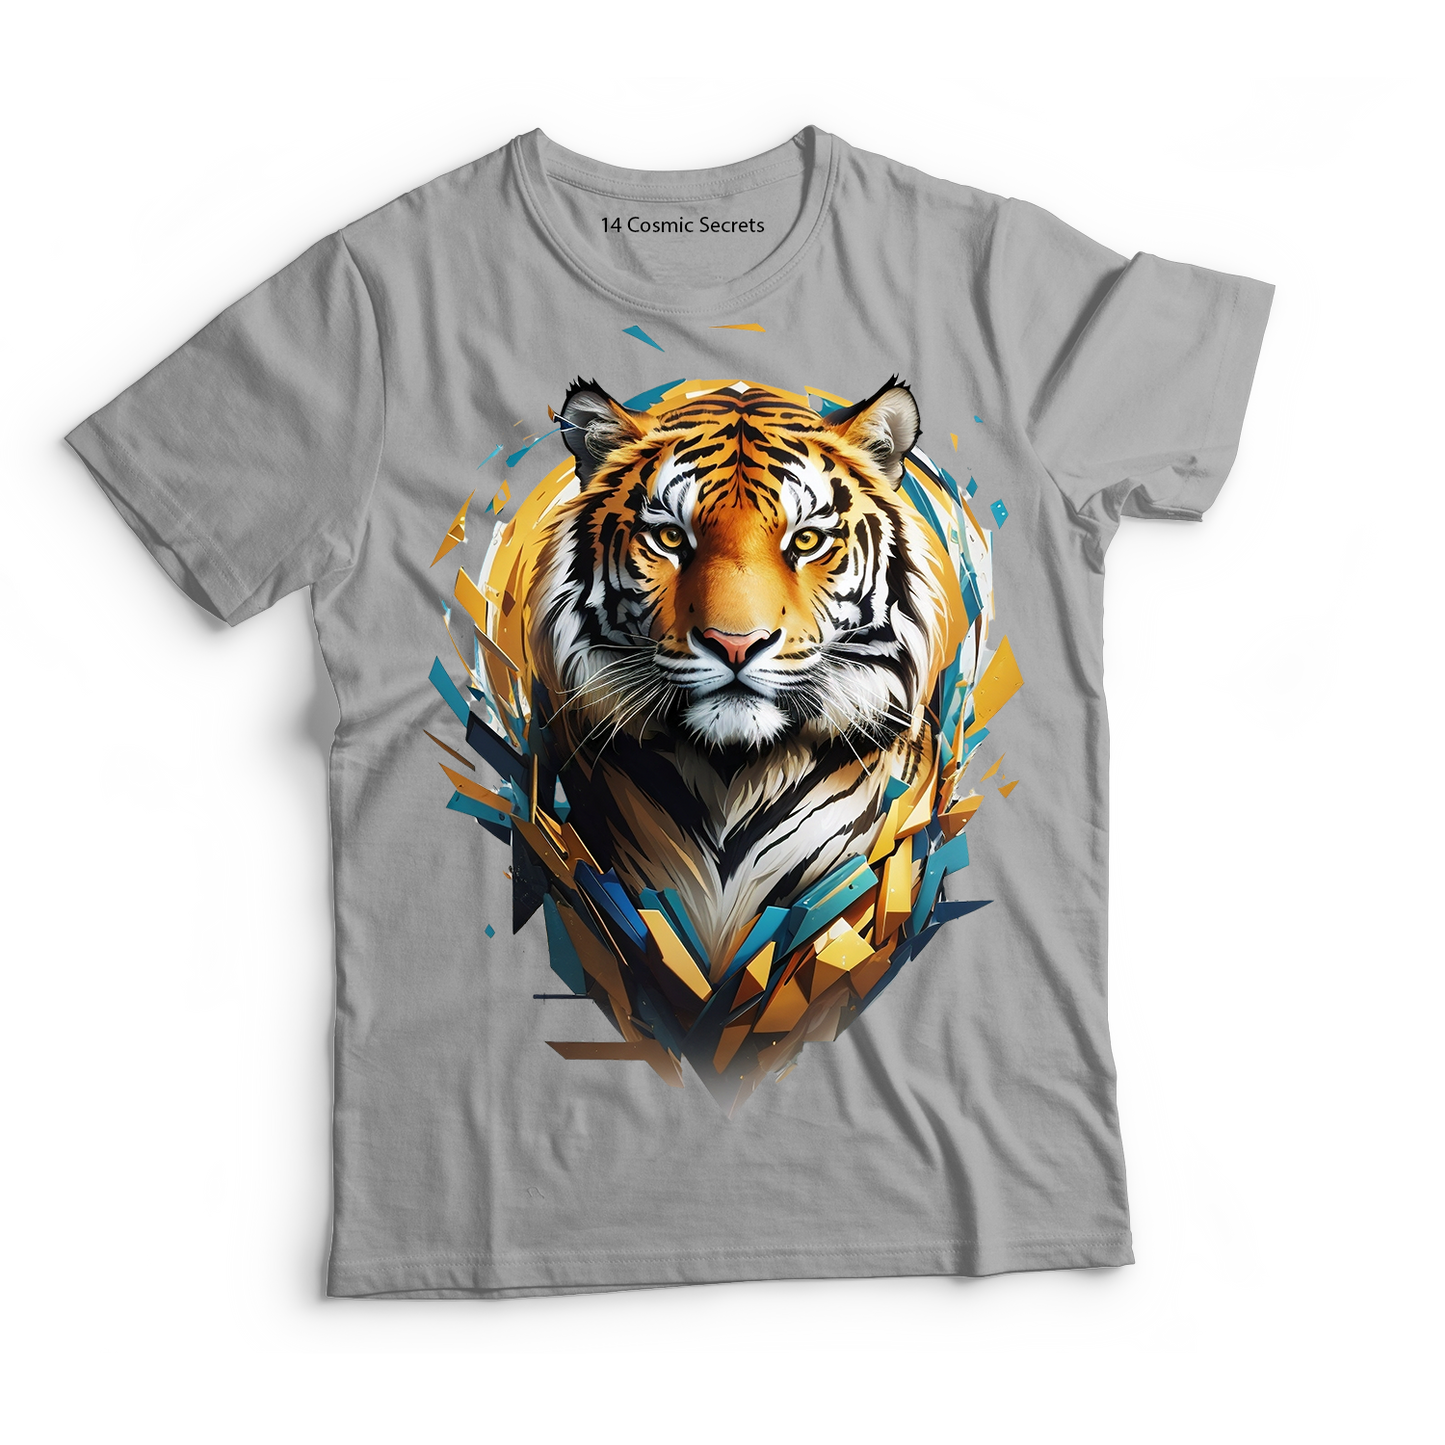 Tiger Kingdom Threads Graphic Printed T-Shirt  Cotton T-Shirt Magnificence of India T-Shirt 🐯🐯🐯🐯🐯